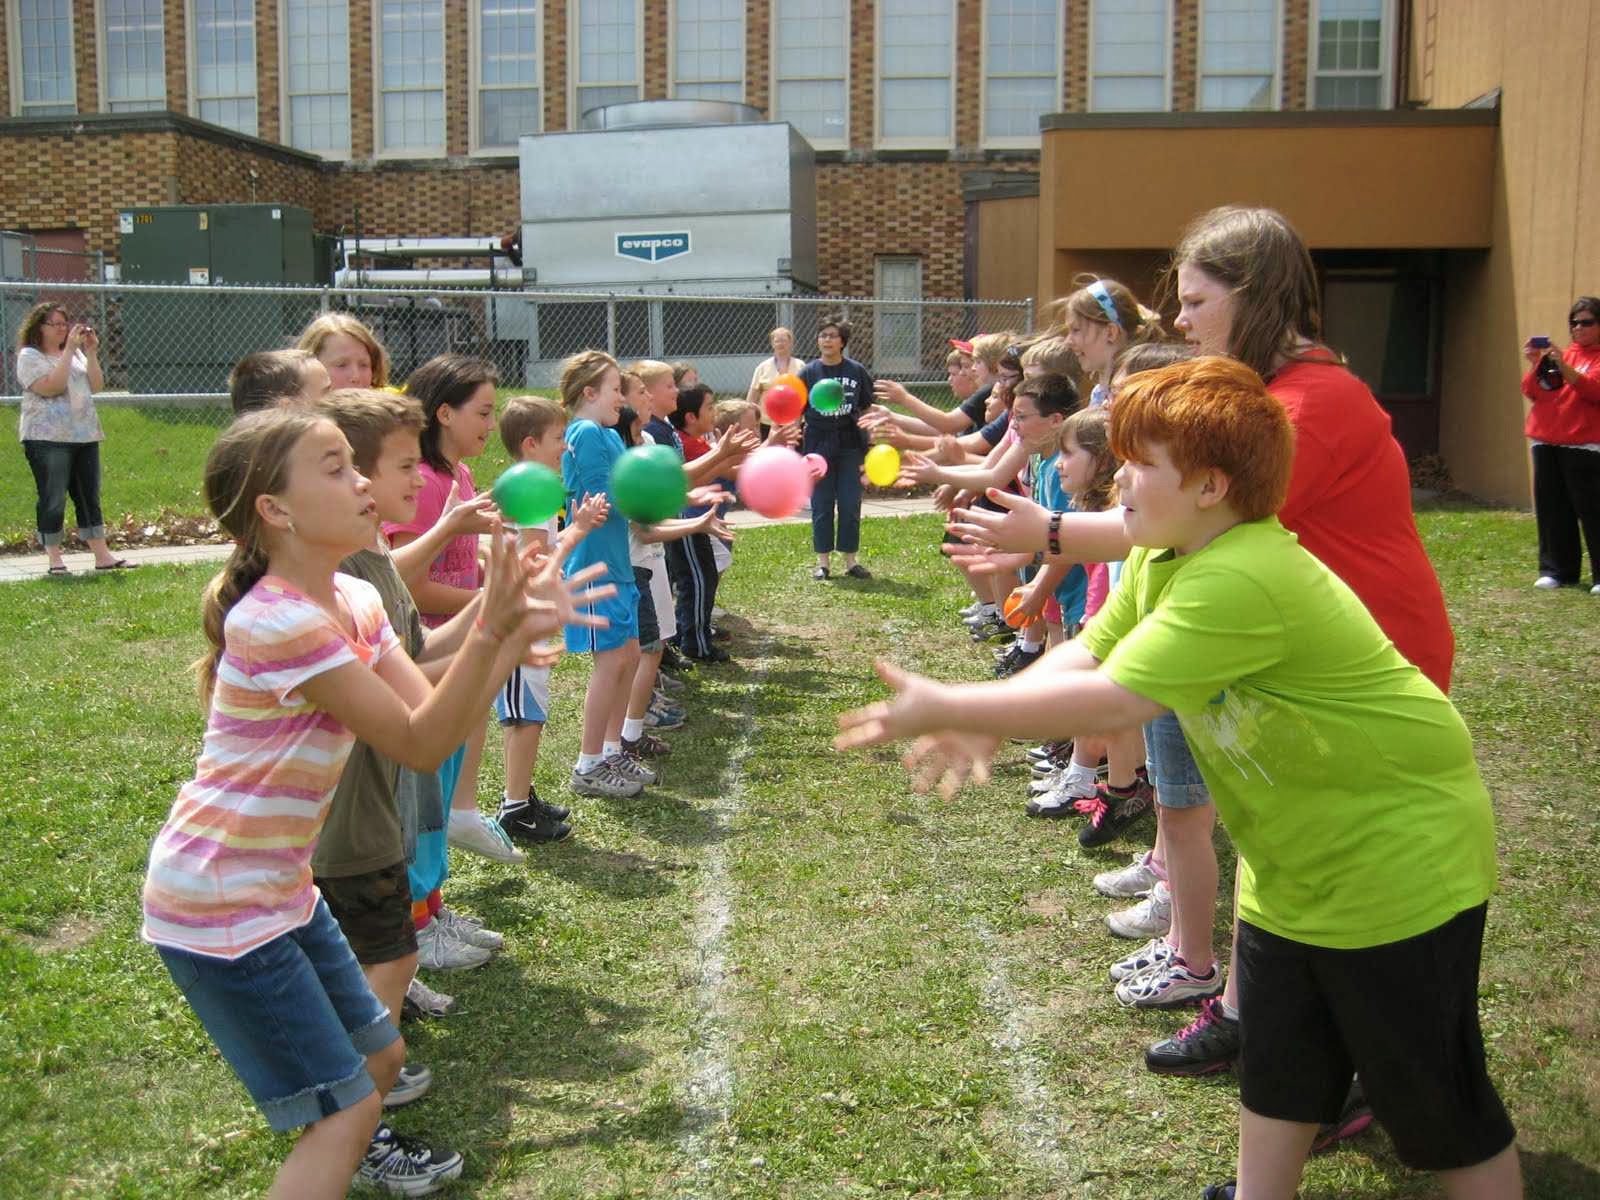 Boys and girls, standing in two lines, tossing water balloons to each other.